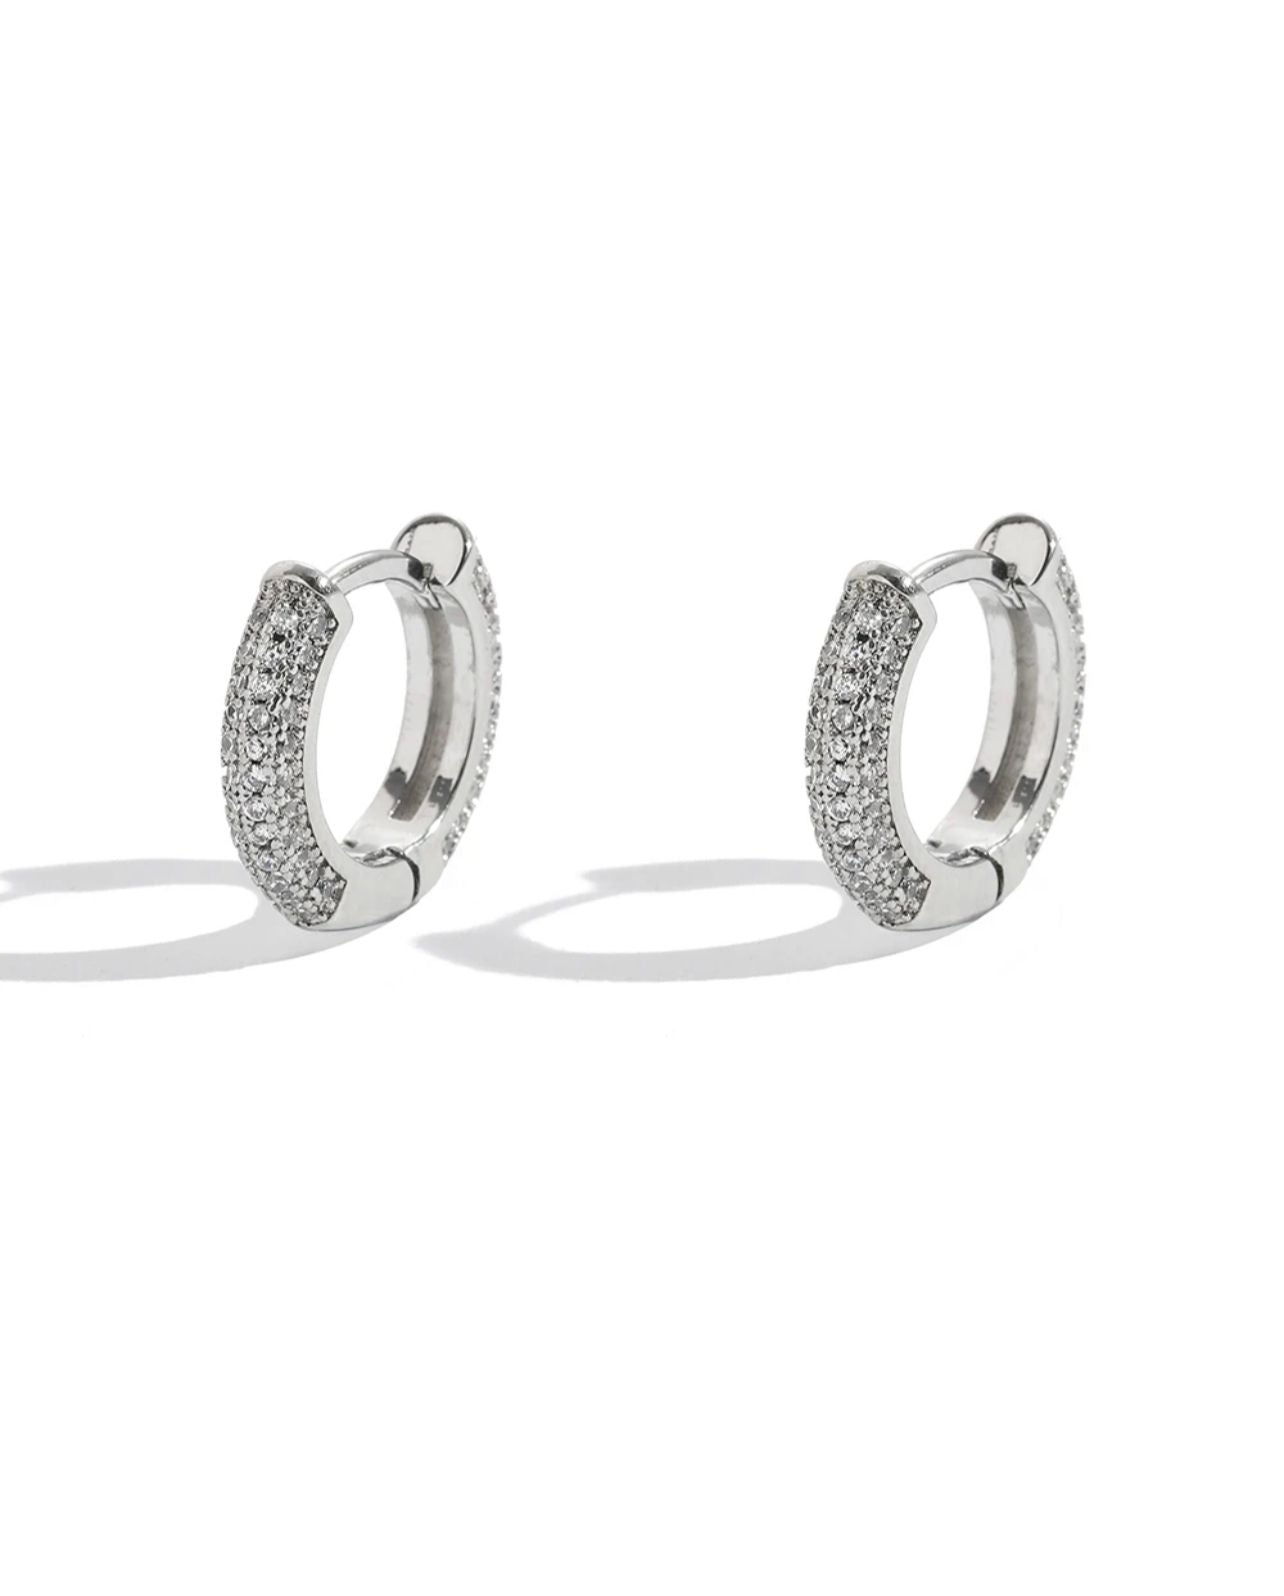 Classic silver hoops